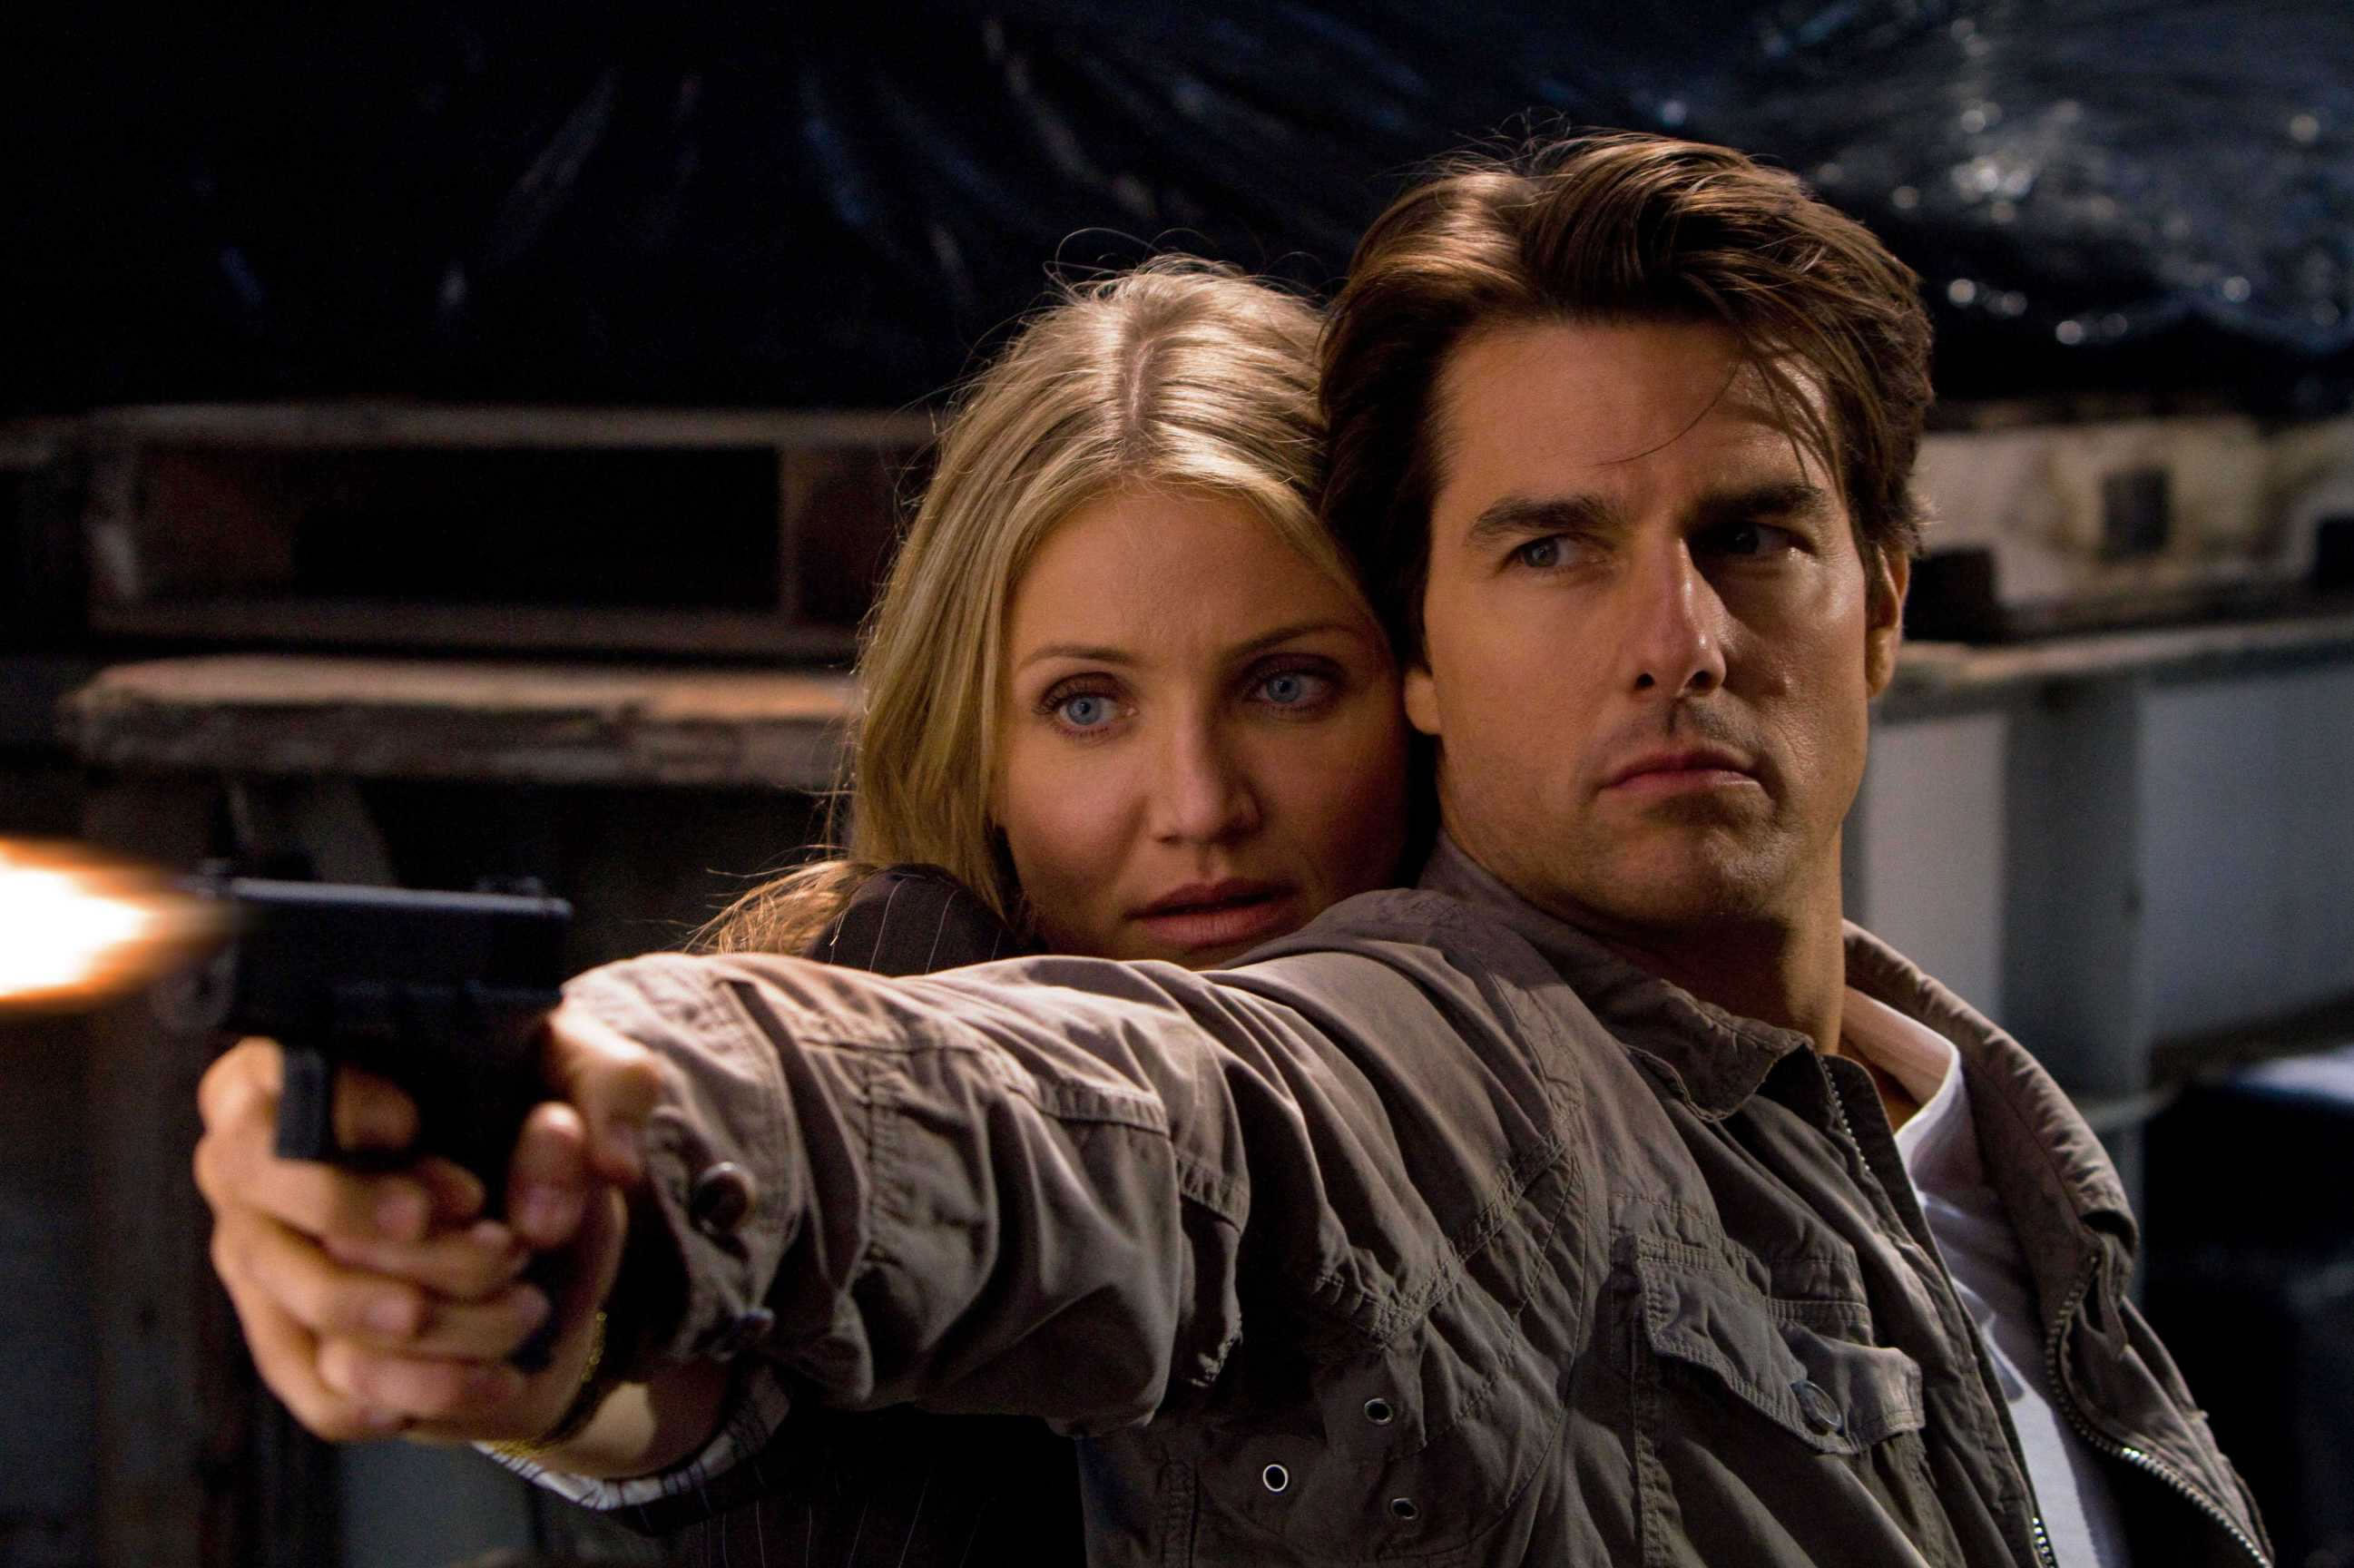 Knight And Day HD wallpapers, Desktop wallpaper - most viewed